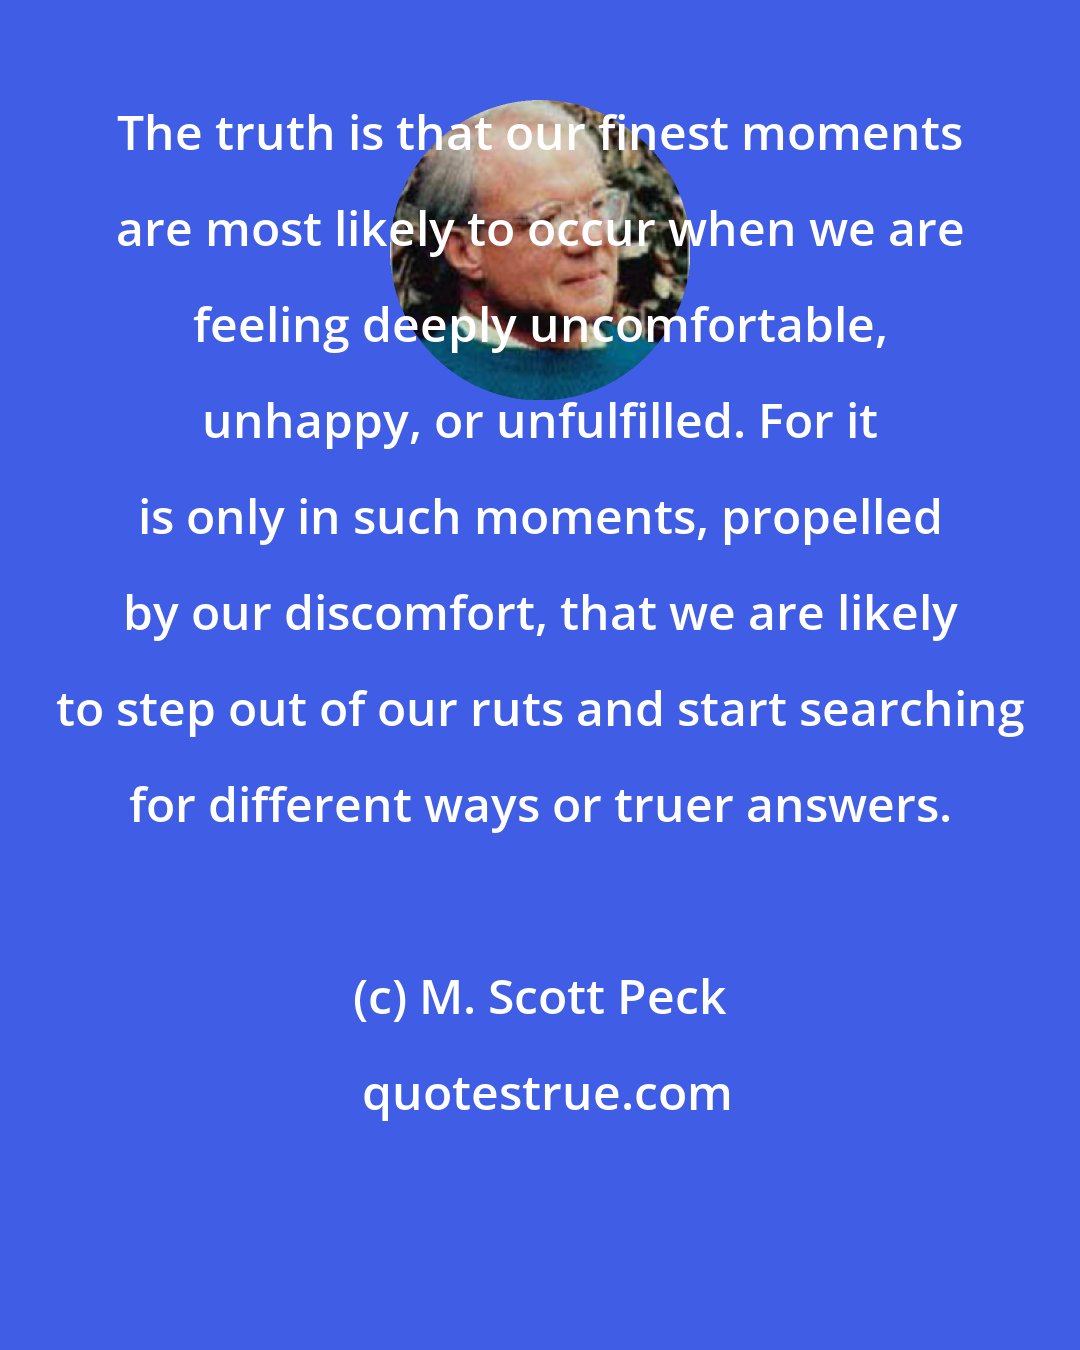 M. Scott Peck: The truth is that our finest moments are most likely to occur when we are feeling deeply uncomfortable, unhappy, or unfulfilled. For it is only in such moments, propelled by our discomfort, that we are likely to step out of our ruts and start searching for different ways or truer answers.